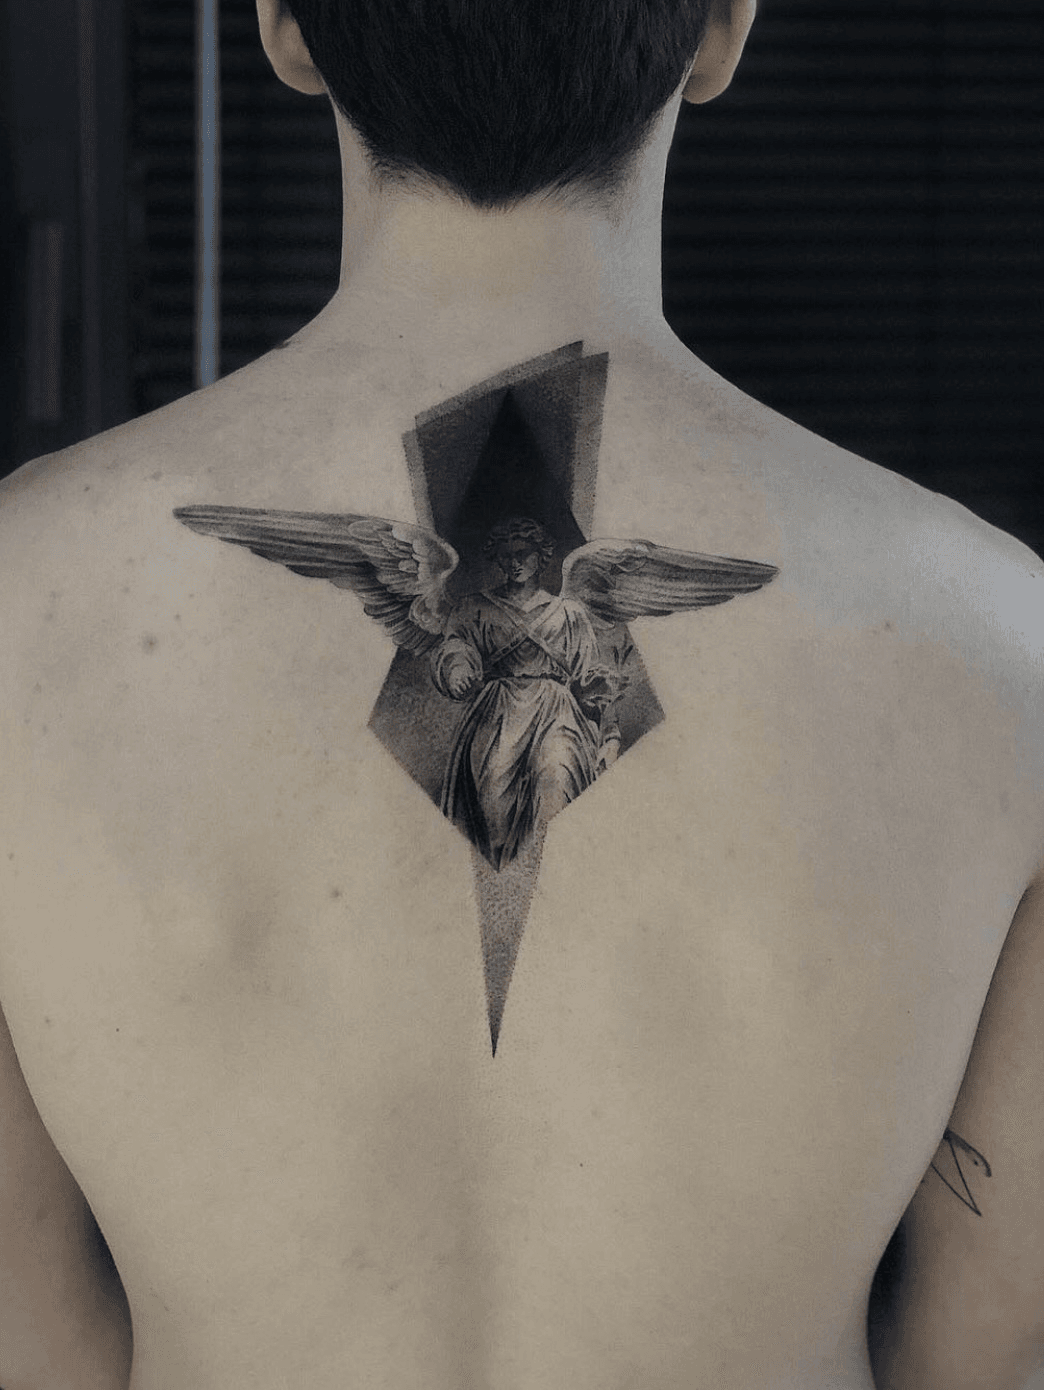 Details more than 77 angel and devil tattoos best  thtantai2